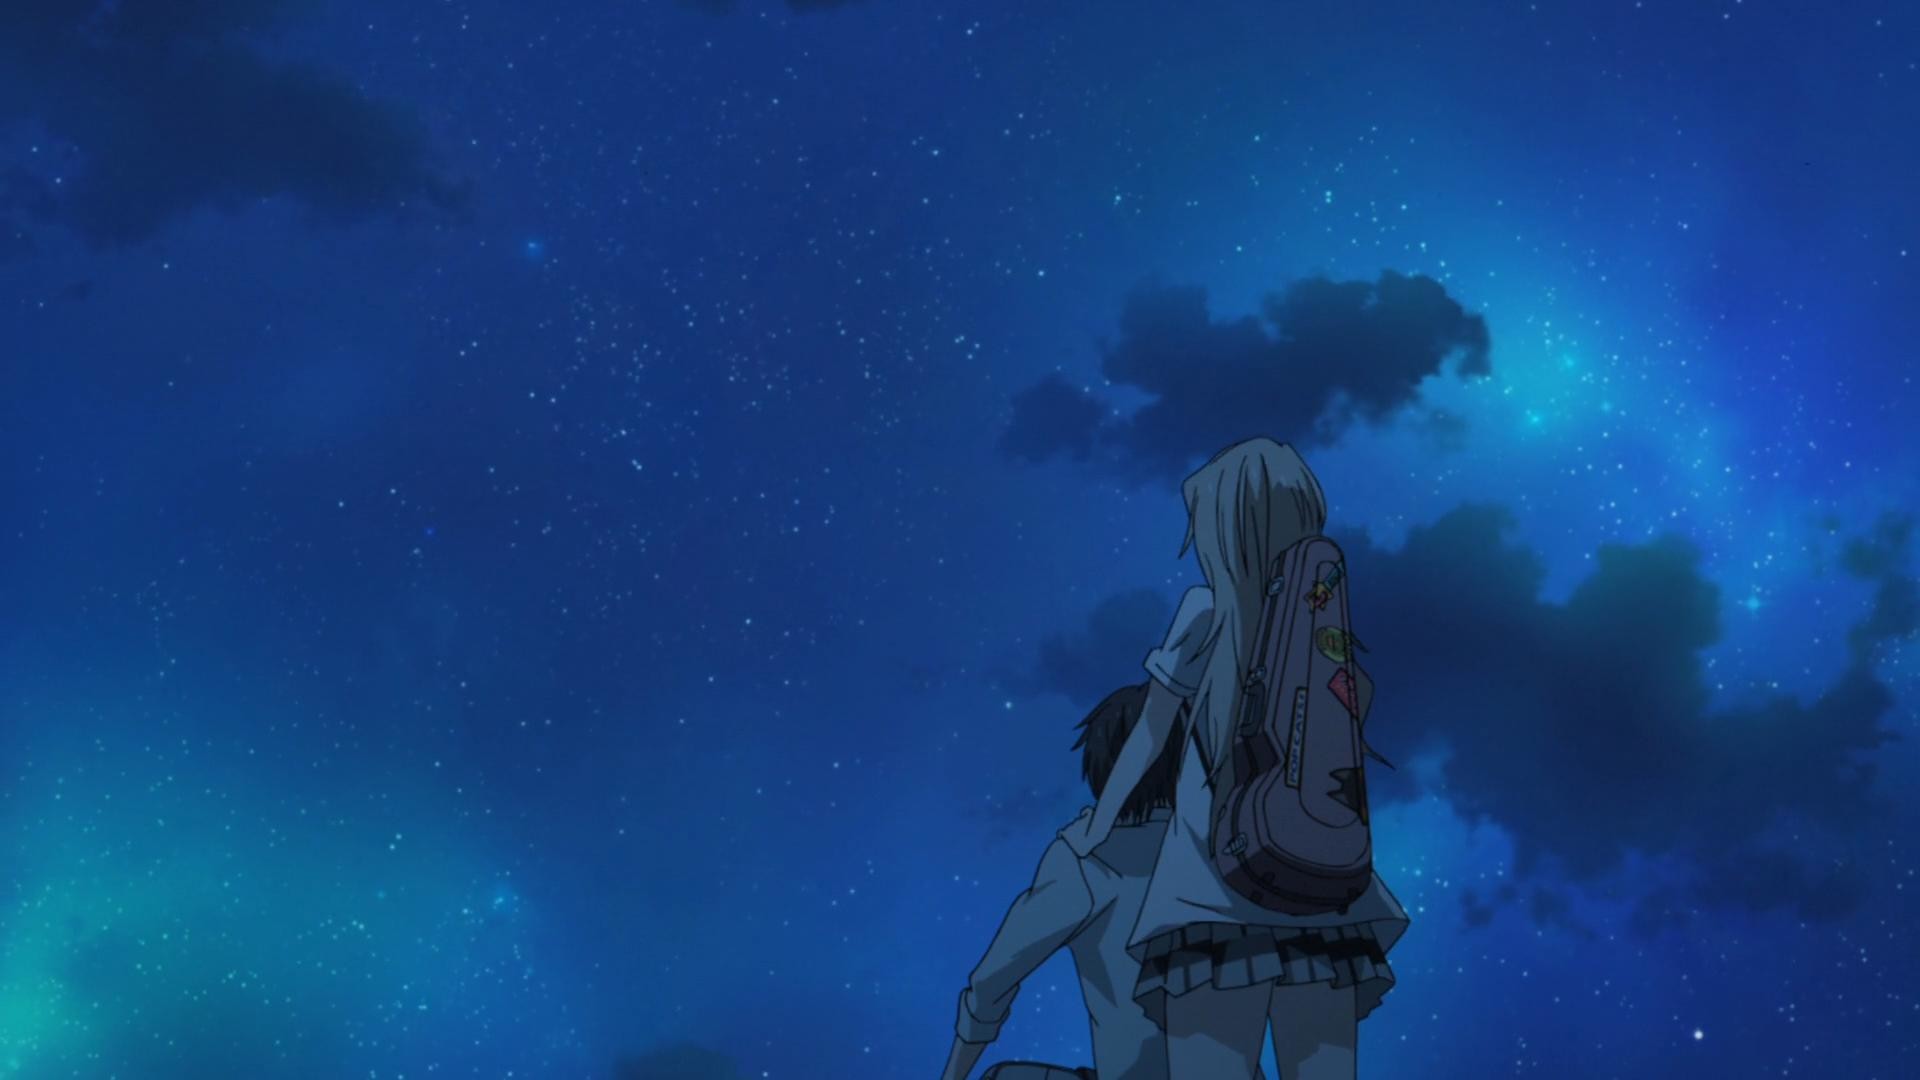 Your Lie In April Wallpapers 81 Pictures